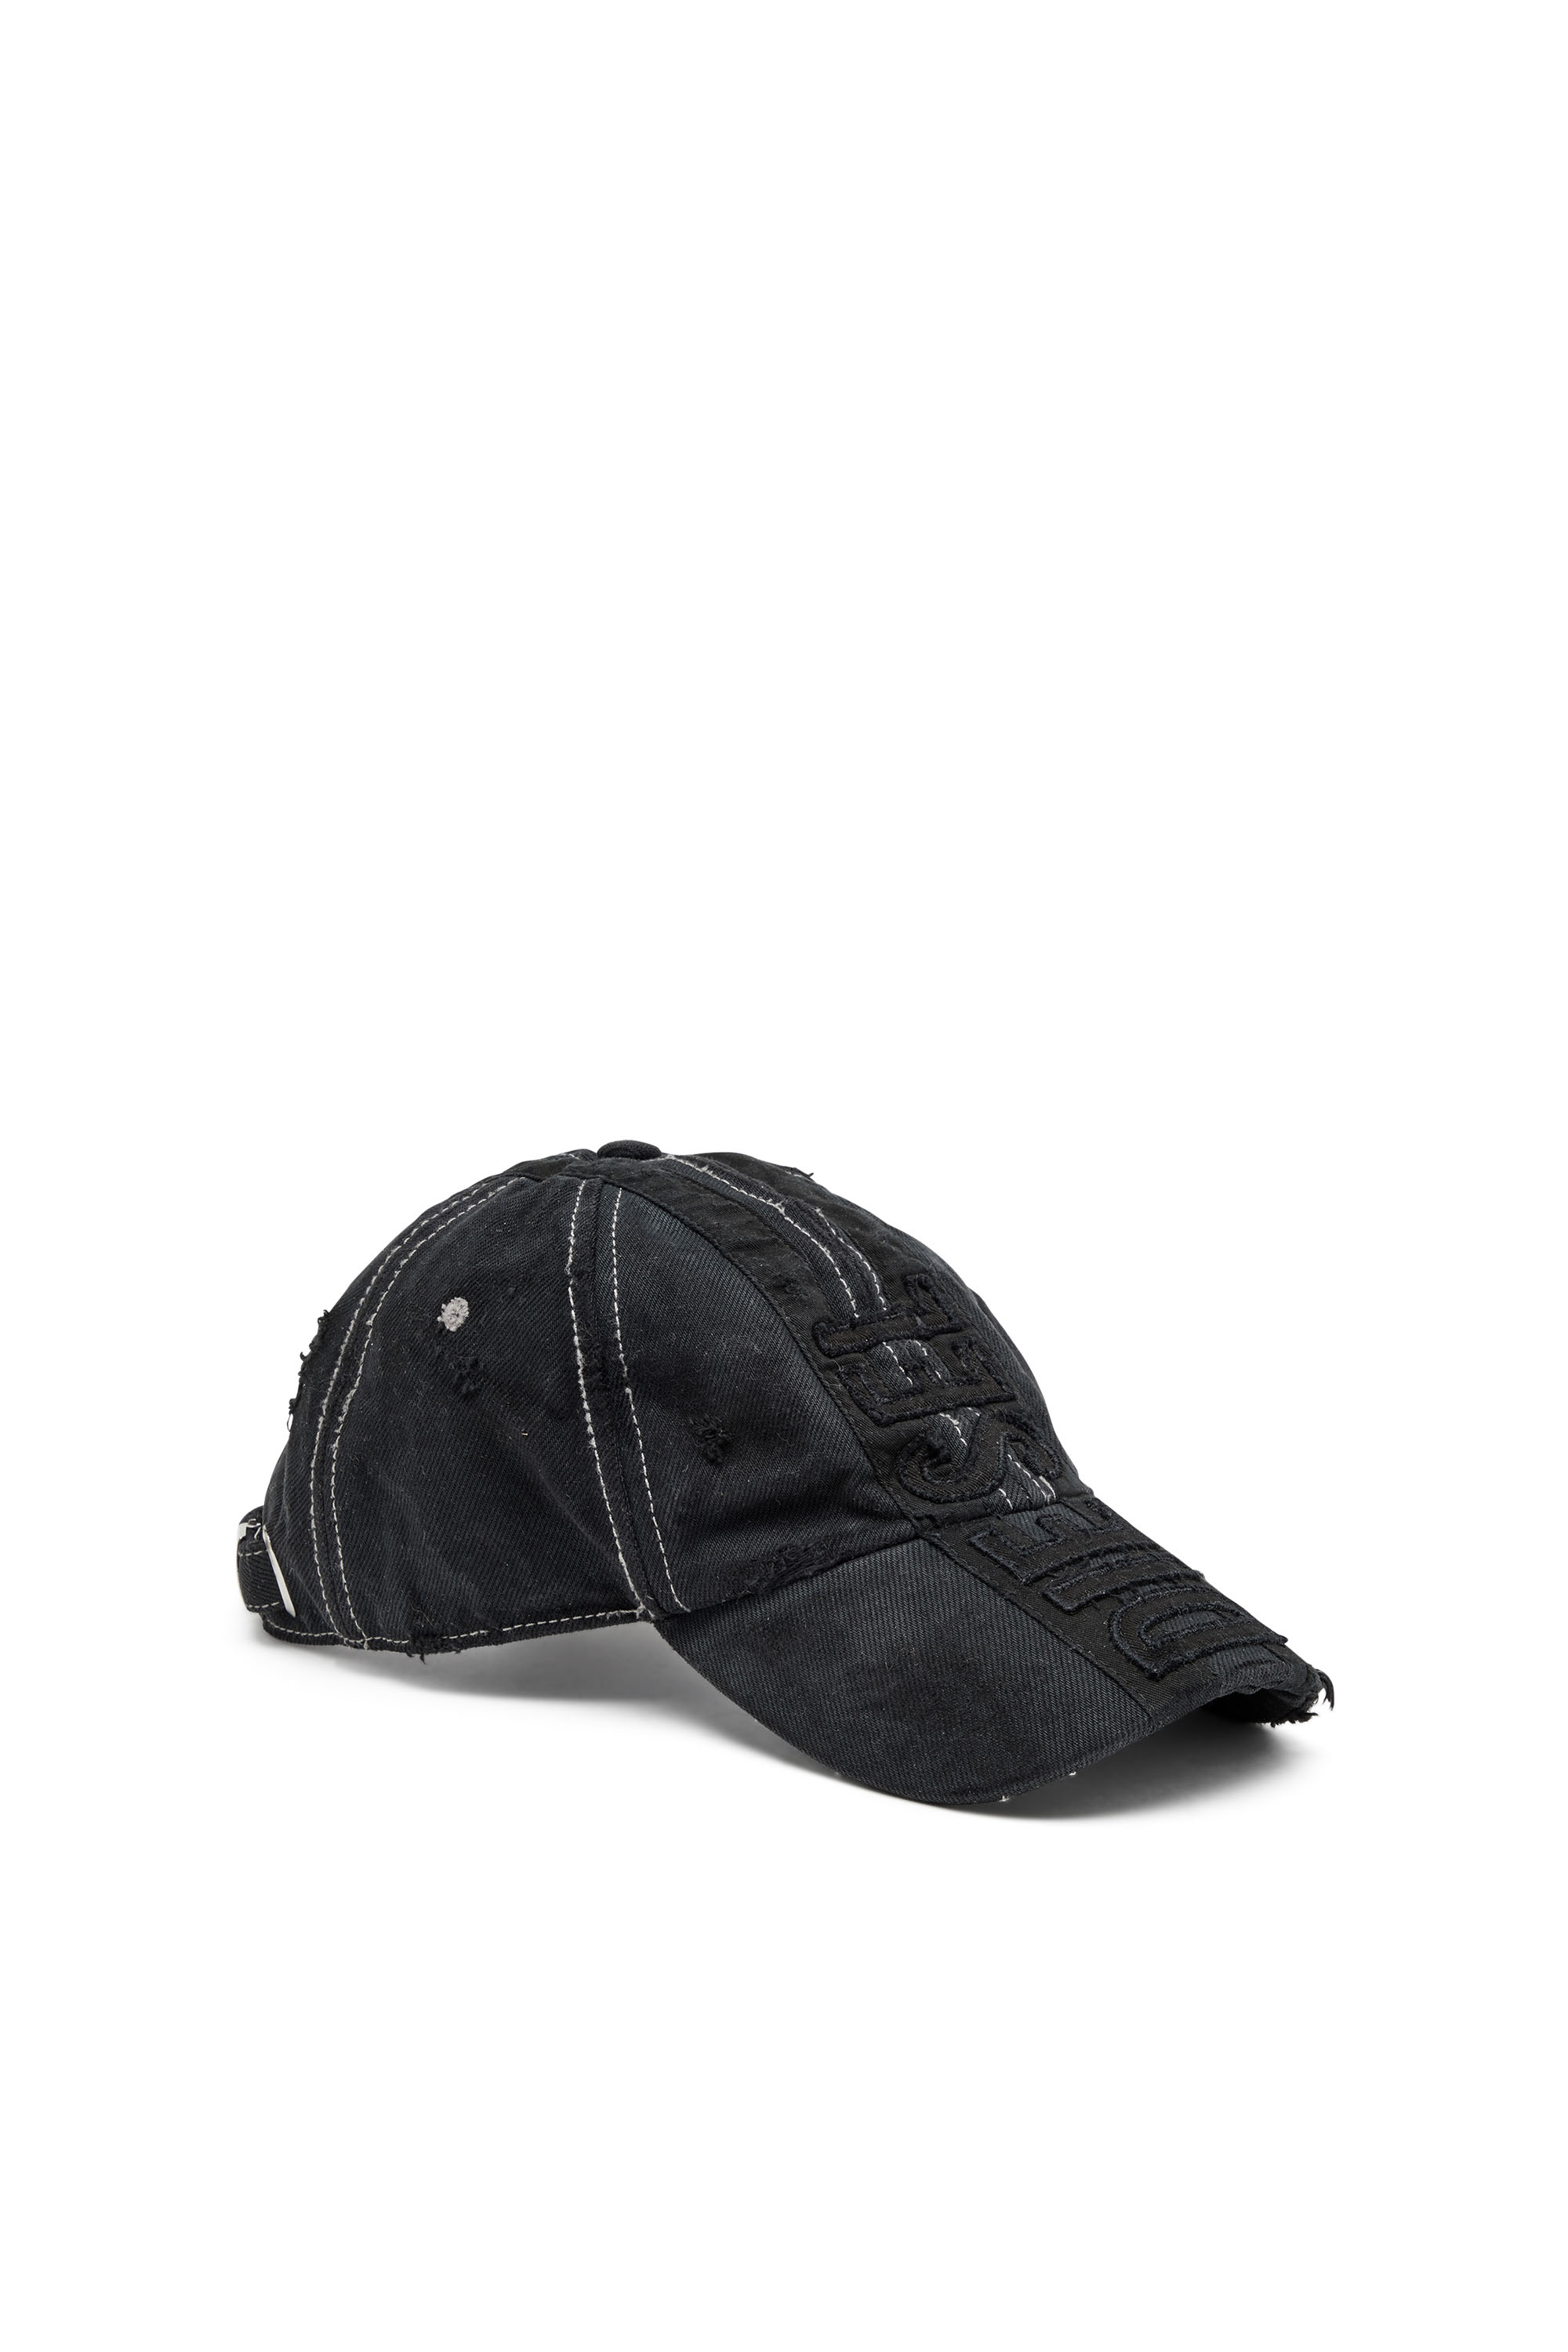 Diesel Baseball Cap With Patches In Black